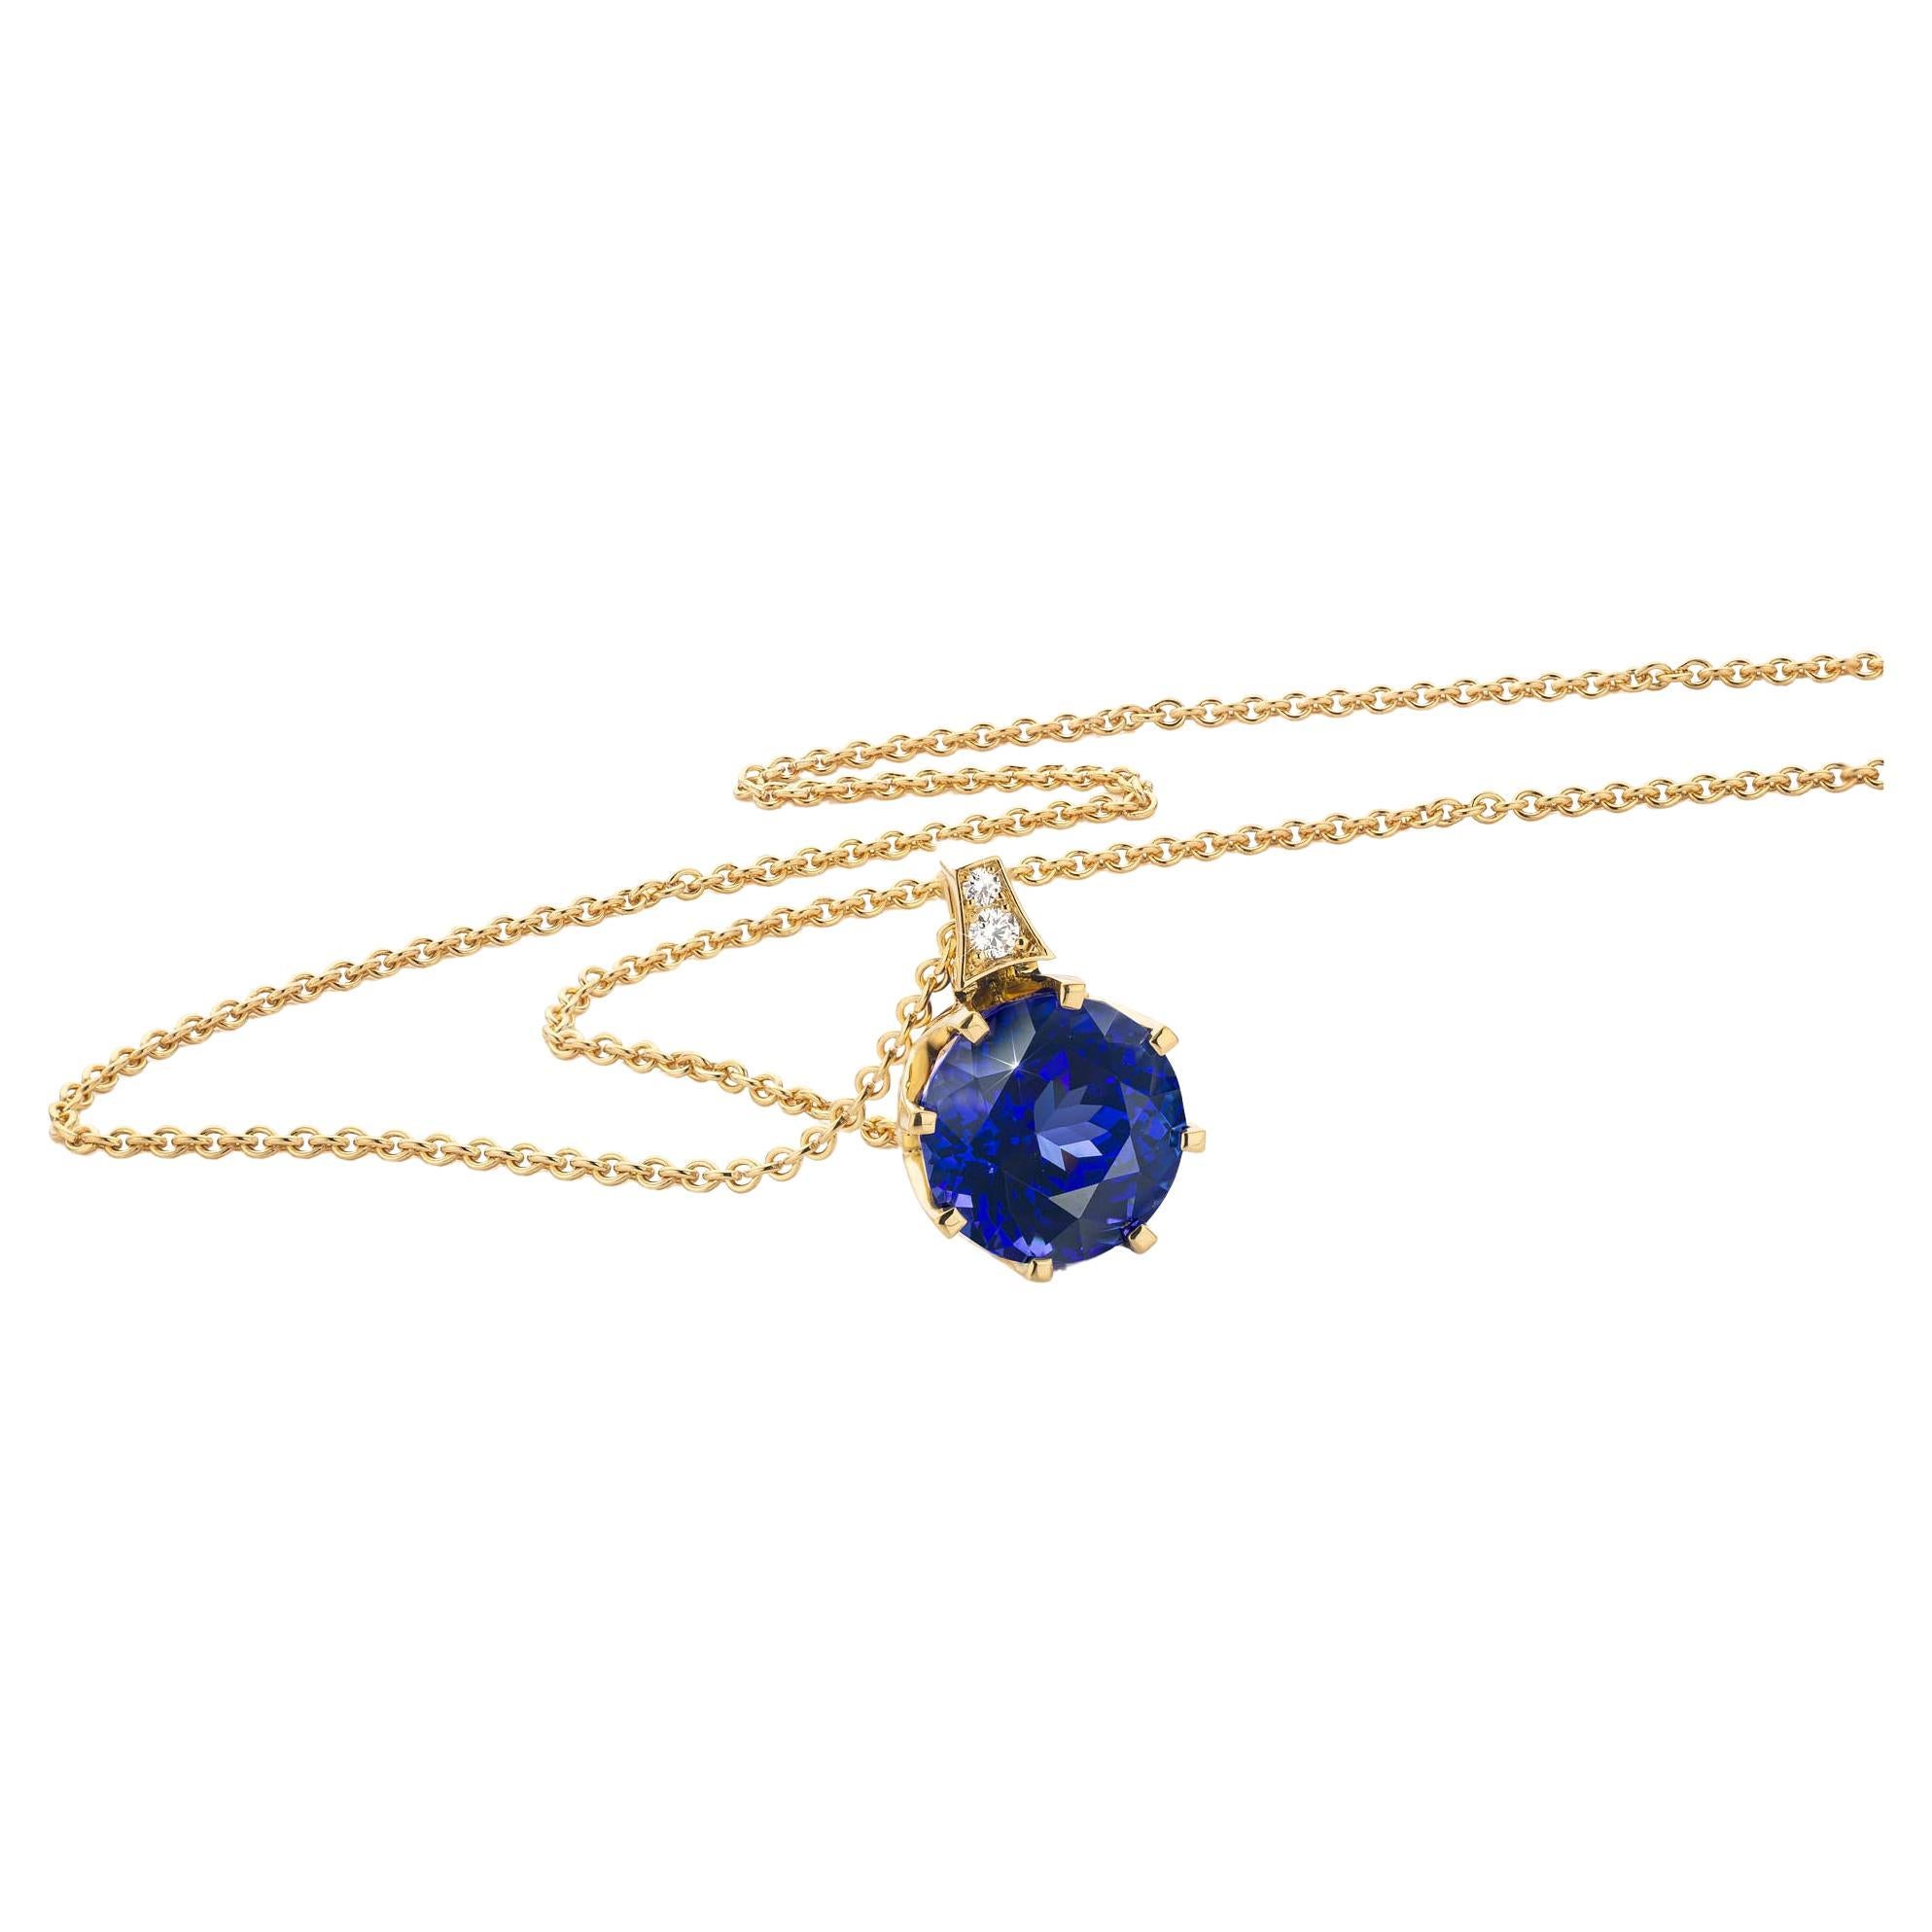 Cober “African dream”with 15.56 ct. Tanzanite and 2 Diamonds YellowGold Pendant 